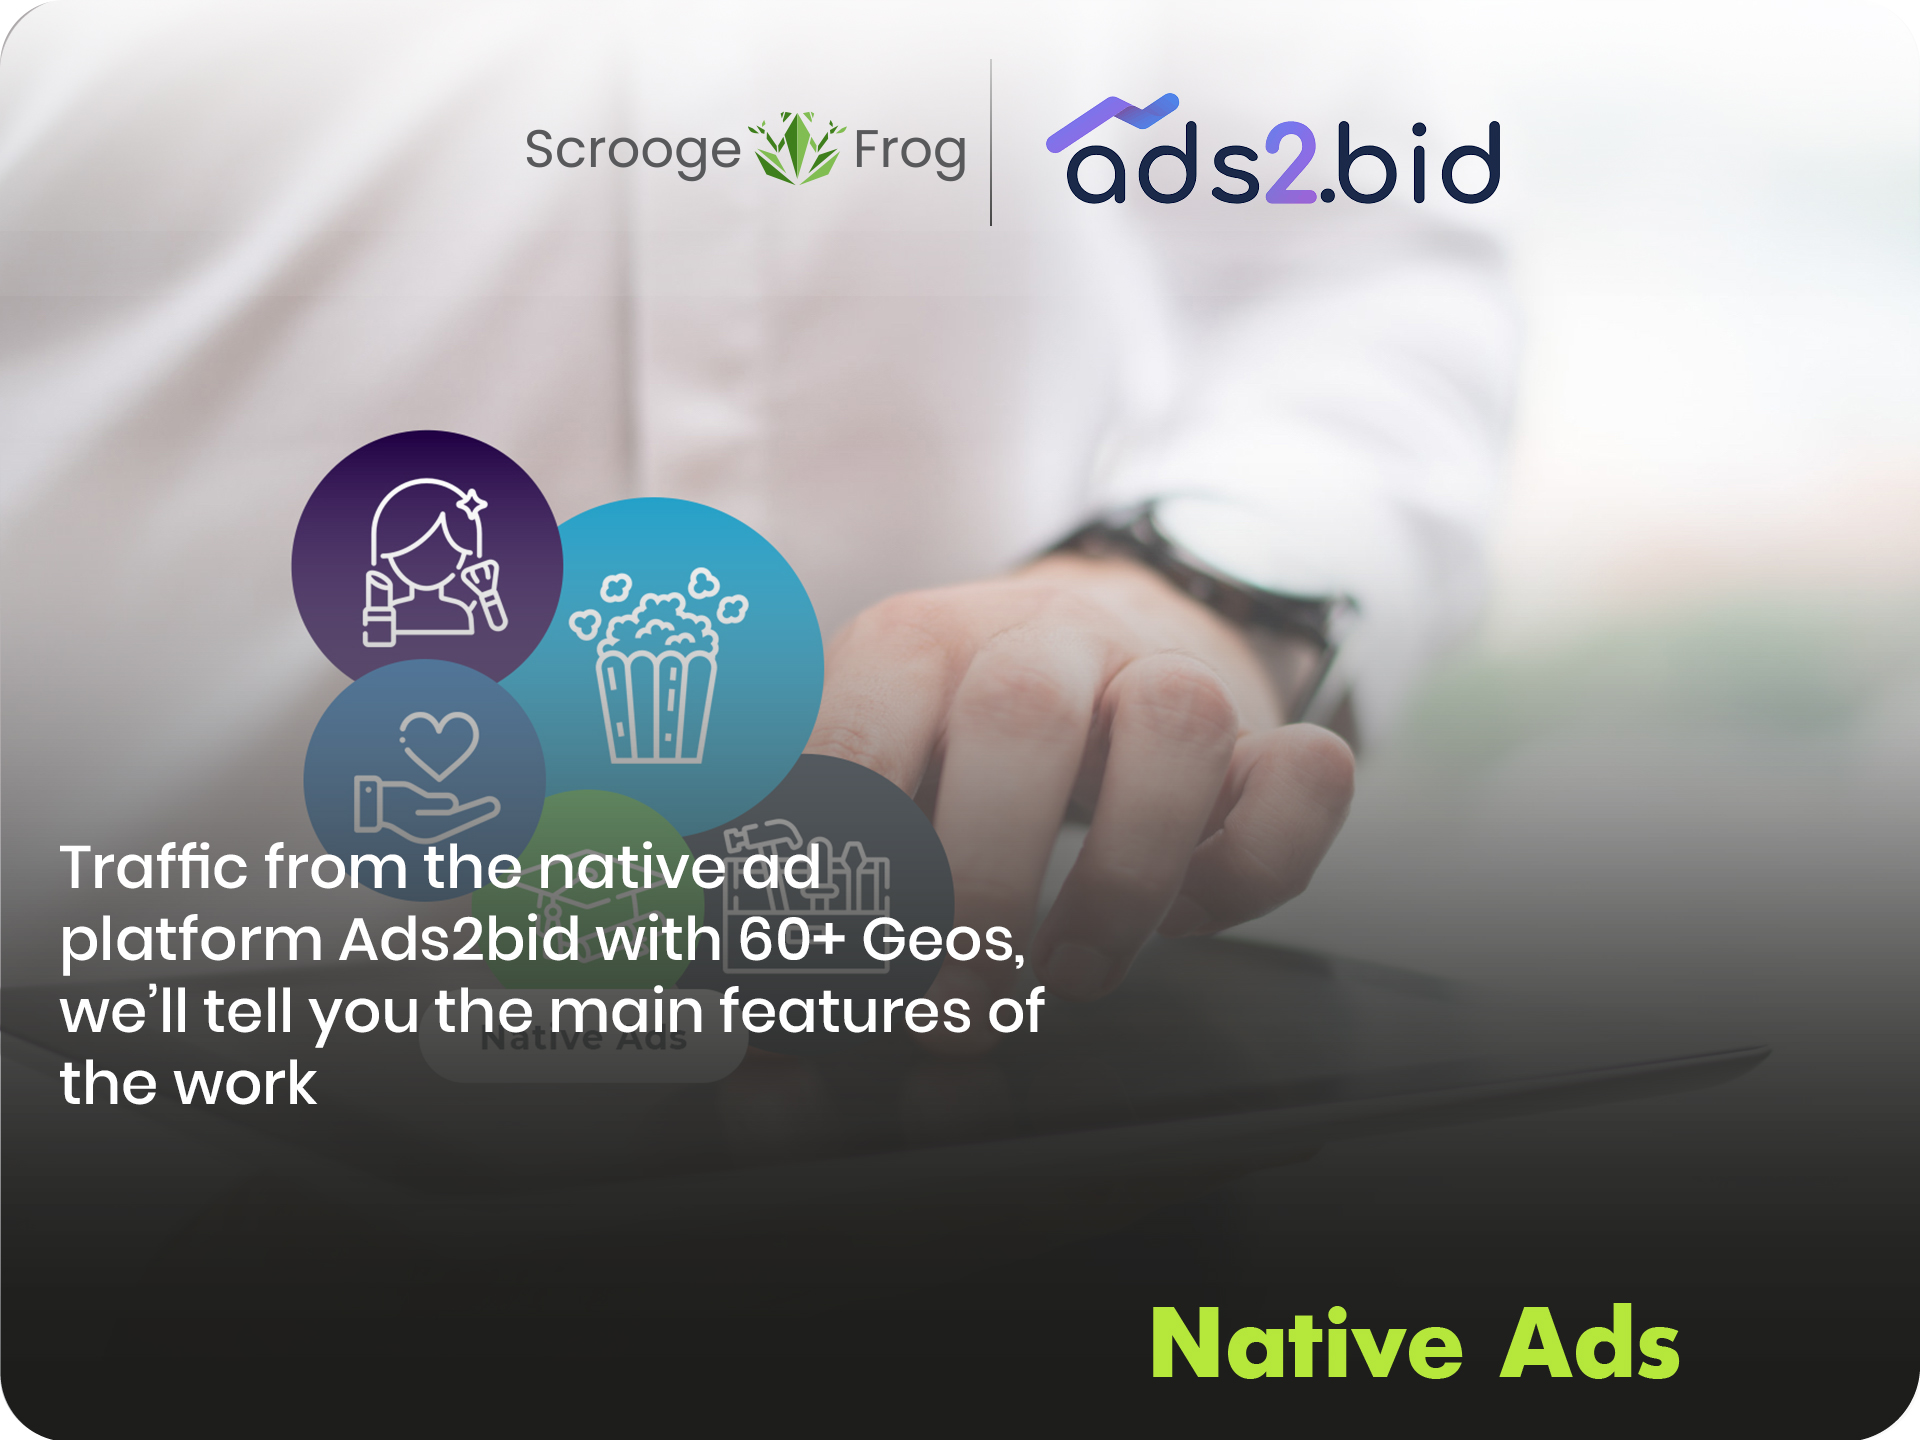 Traffic from the native ad platform Ads2bid with 60+ Geos, we’ll tell you the main features of the work